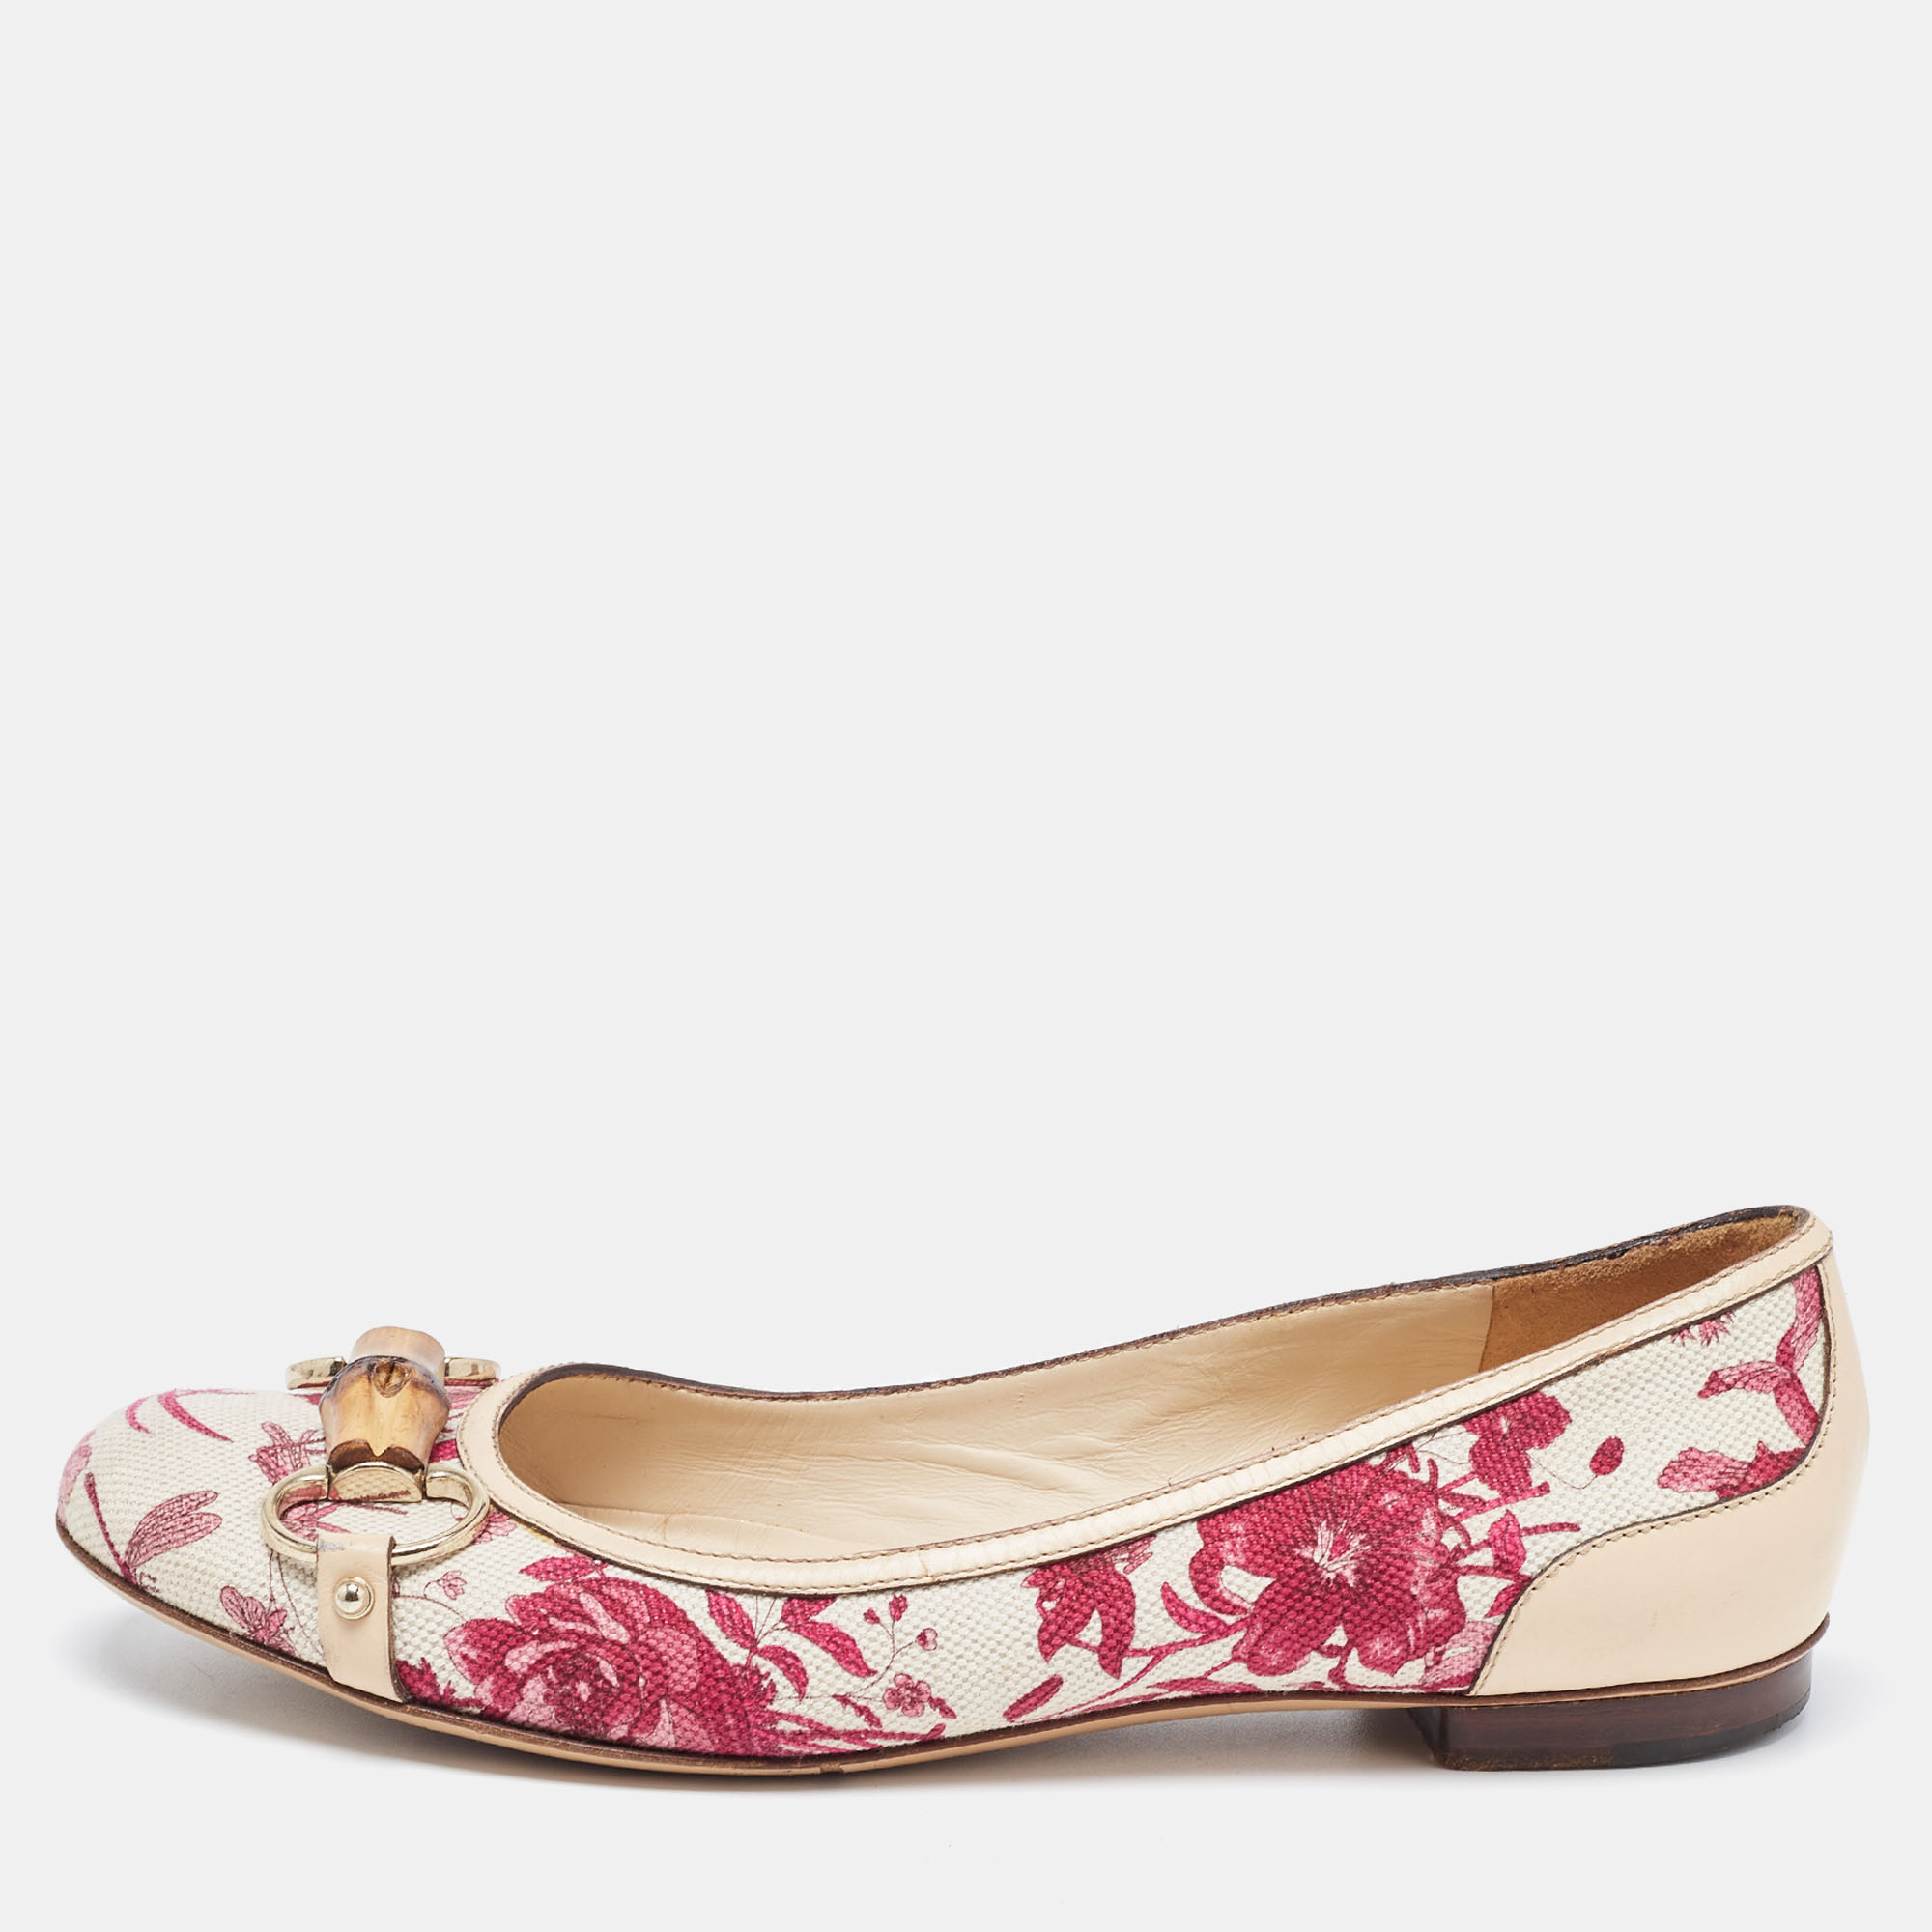 Gucci Multicolor Flora Canvas And Leather Bamboo Bit Ballet Flats Size 38